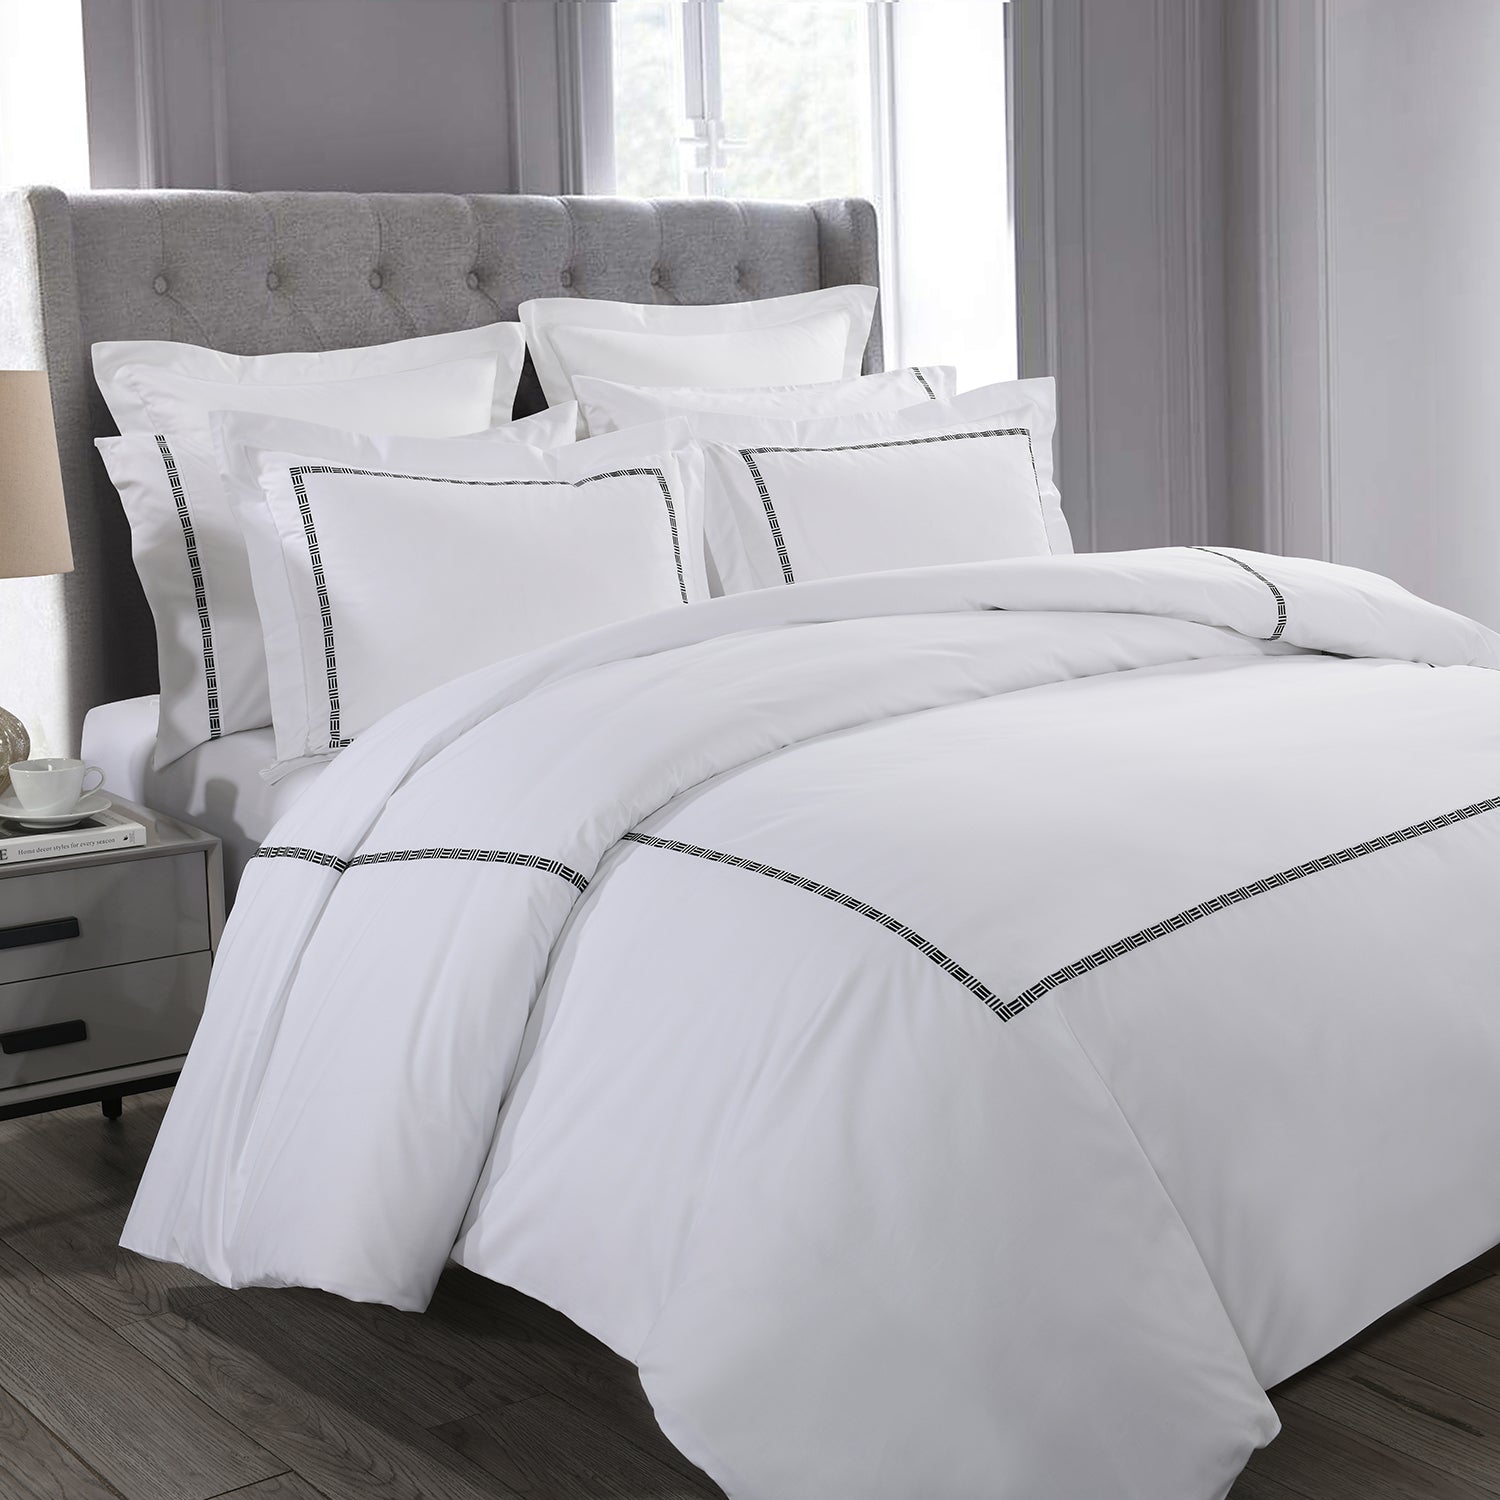 White comforter and pillow shams on a bed | Riverbend Home